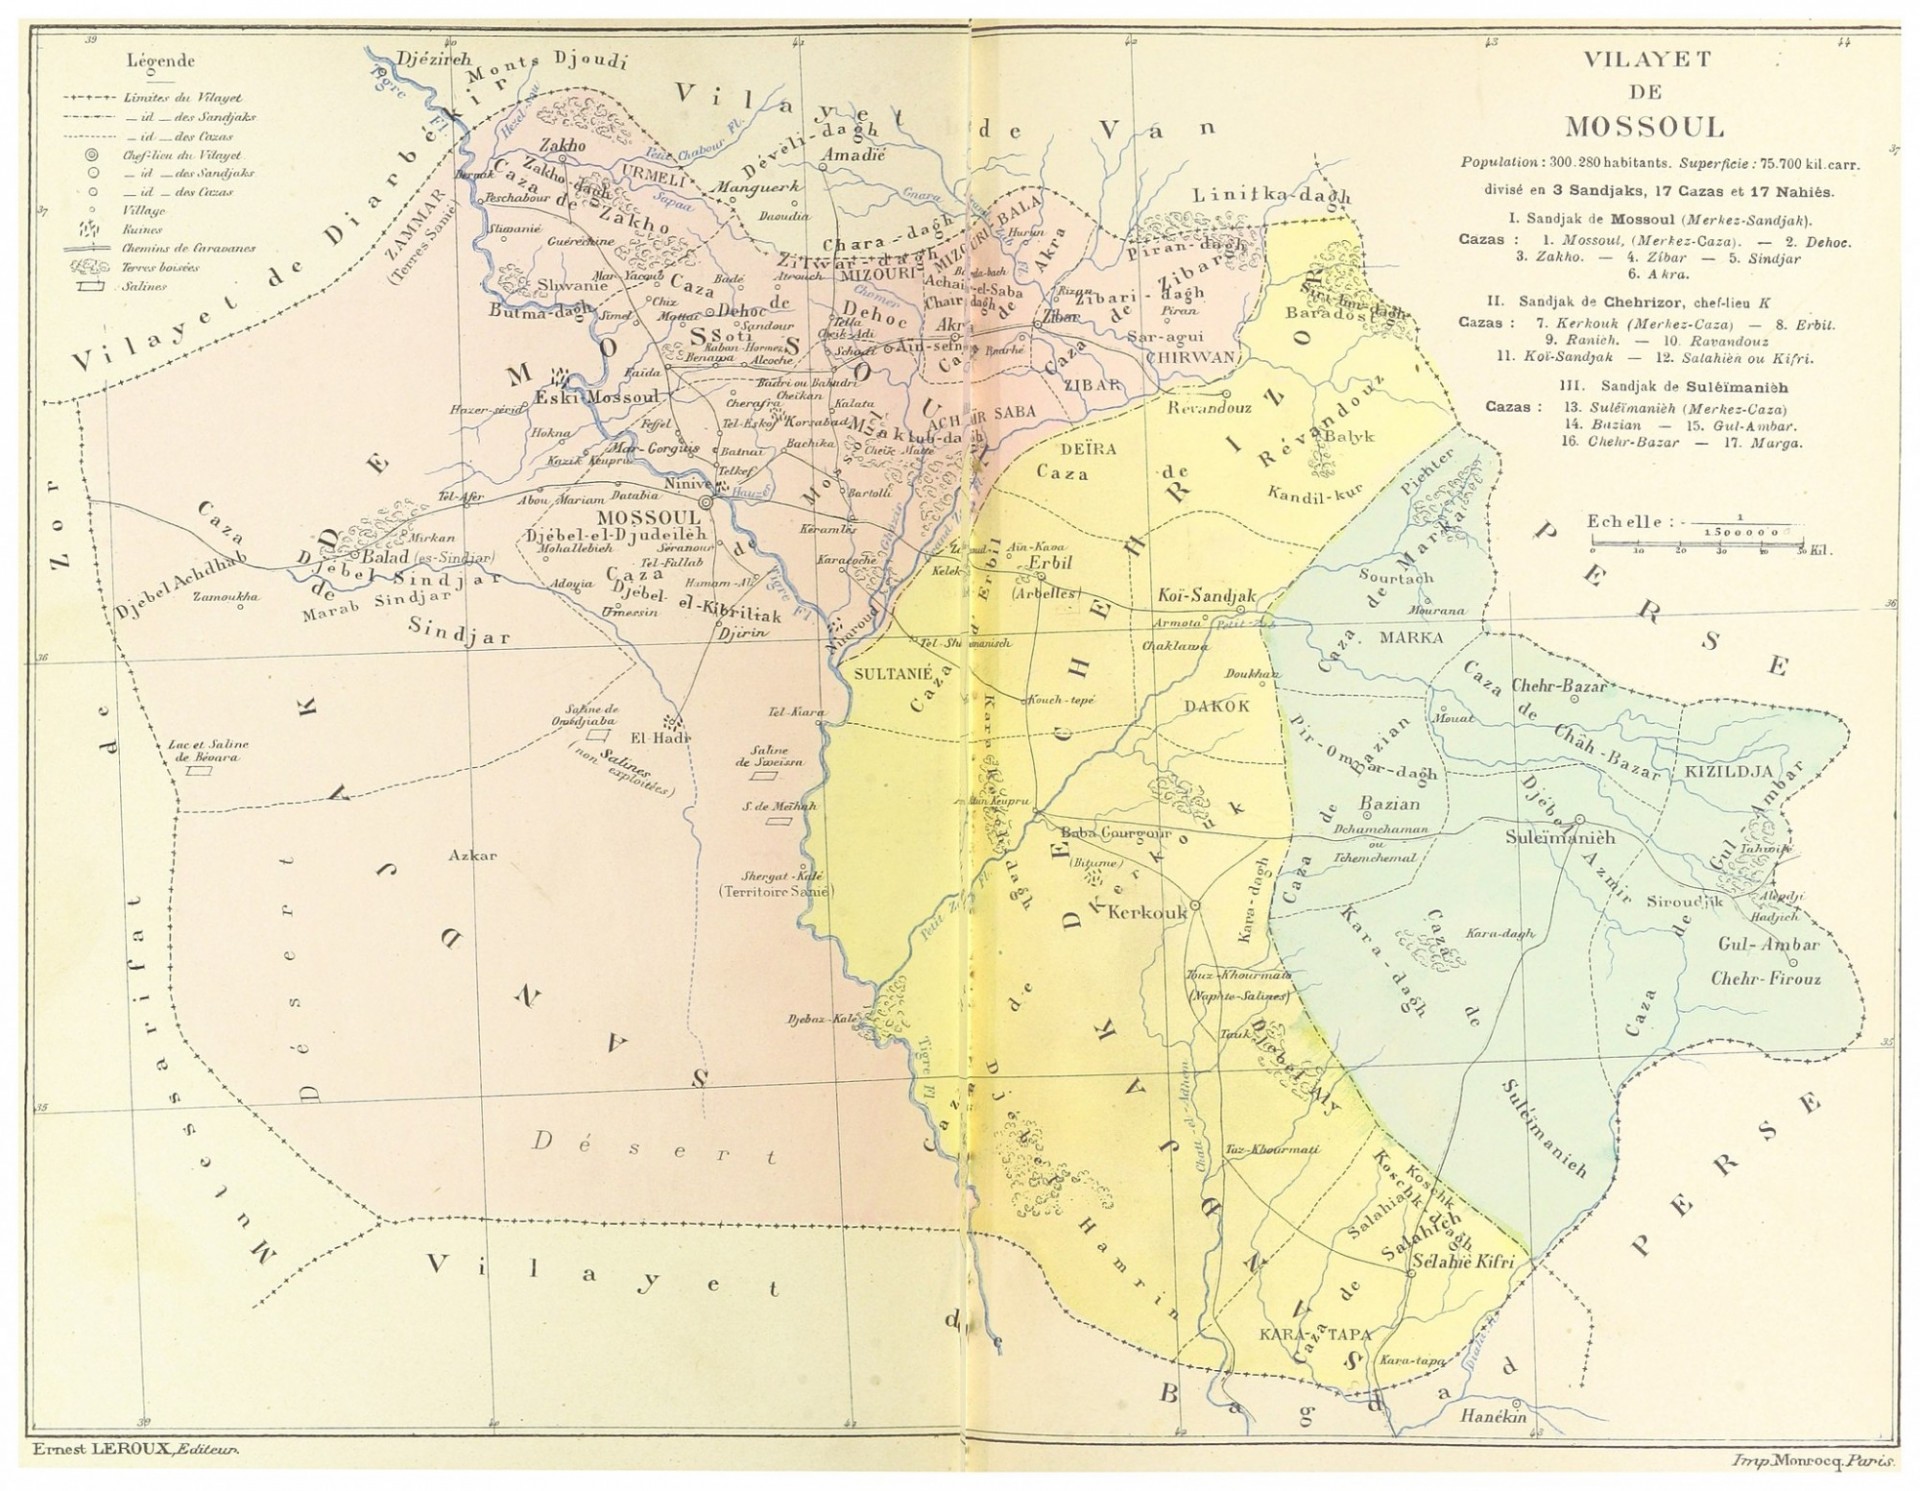 The Vilayet of Mosul, c. 1892. Source: British Library, via Wikimedia Commons. Public domain.